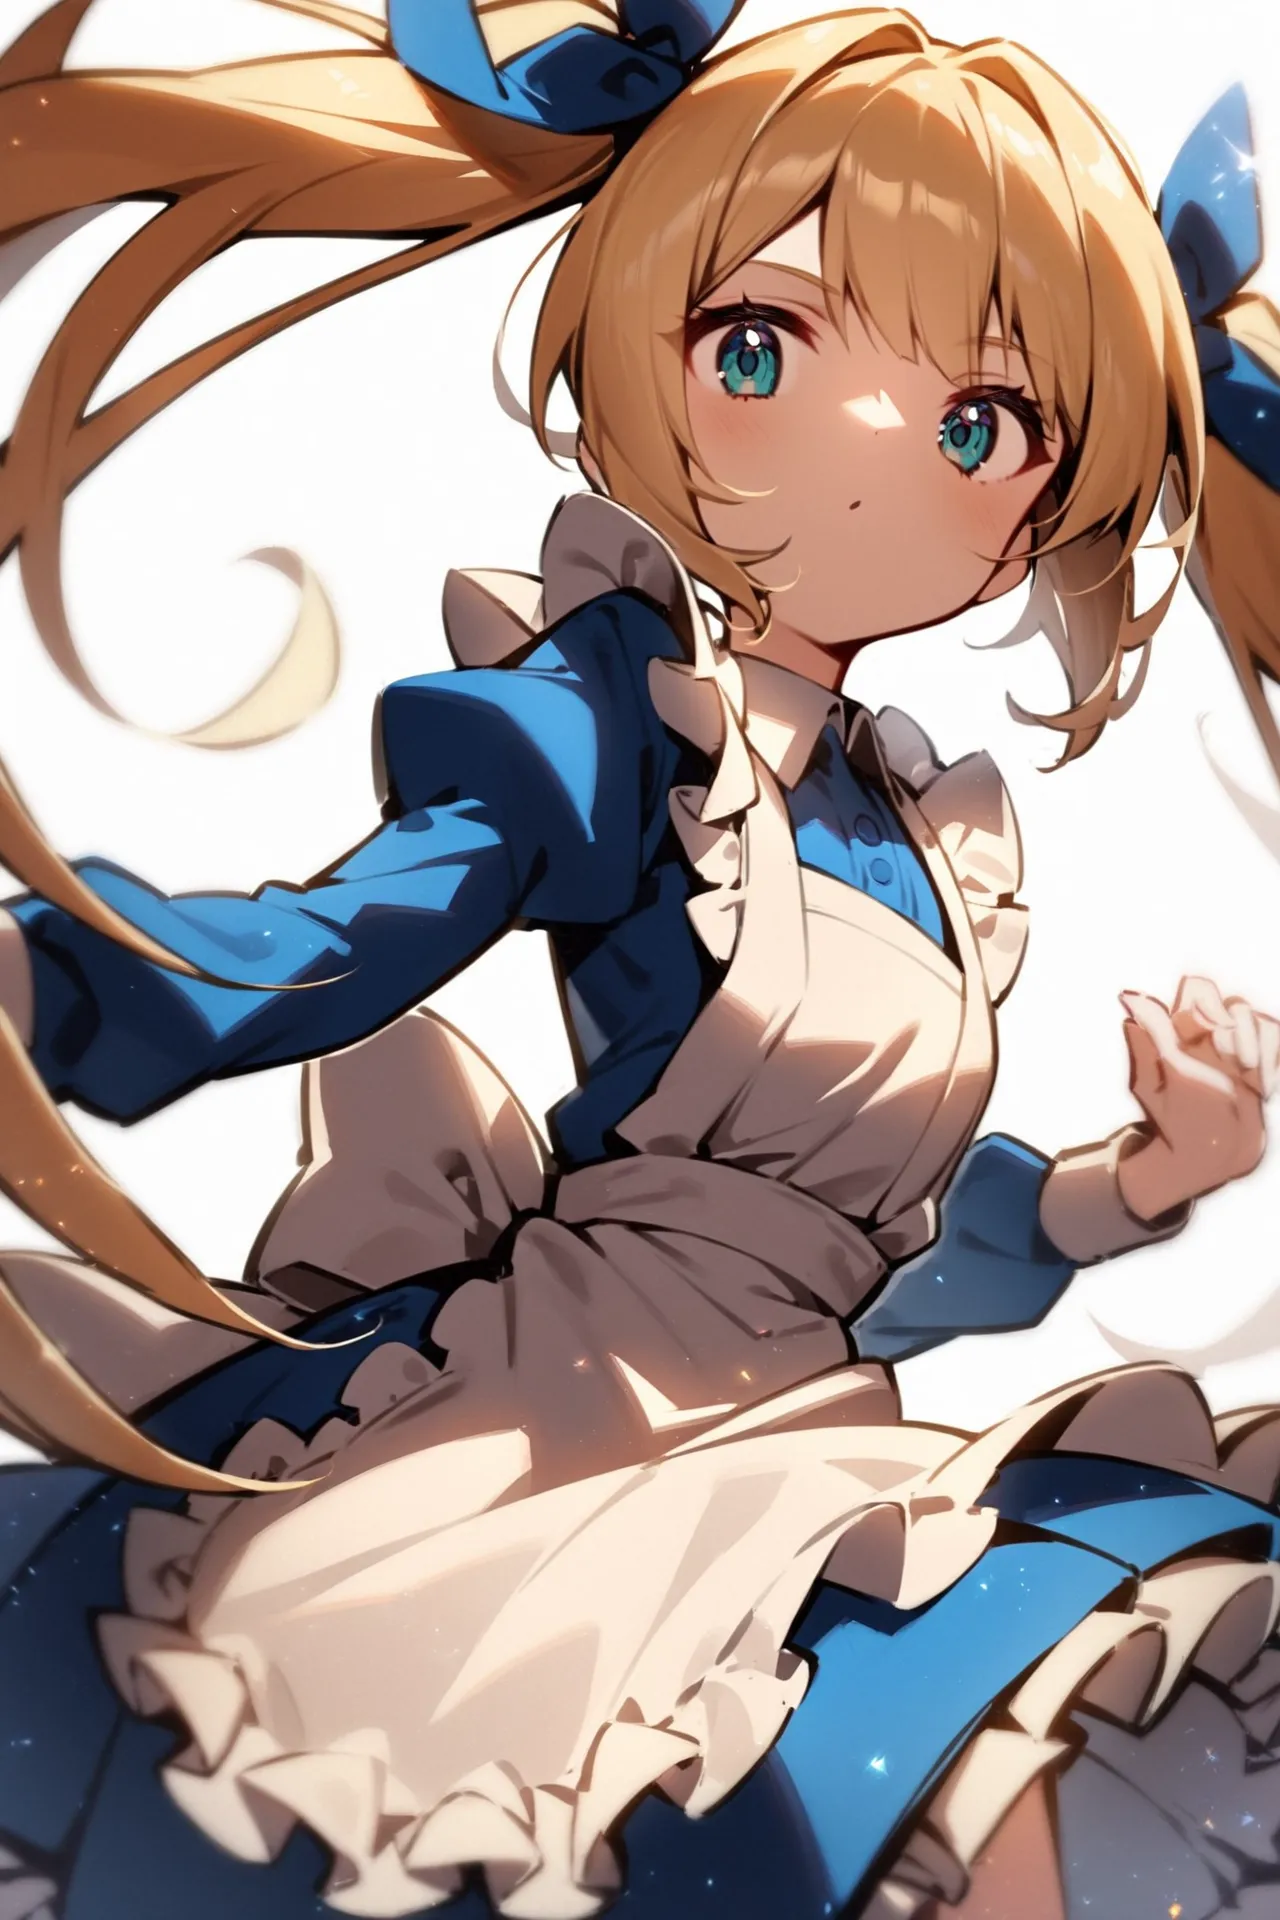 '1girl, dutch angle,\nblonde hair, twintails, blue dress, white apron,\nwhite background,\nAlice in glitterworld\nNegative prompt: (worst quality, low quality:1.4), nsfw\nSteps: 35, Sampler: DPM++ 2M SDE Karras, CFG scale: 7, Seed: 1, Size: 640x960, Model hash: 642b08ca49, Model: ConfusionXL2.0_fp16_vae, VAE hash: 63aeecb90f, VAE: sdxl_vae_0.9.safetensors, Denoising strength: 0.6, Clip skip: 2, Hires upscale: 2, Hires steps: 15, Hires upscaler: ESRGAN_4x, Eta: 0.68, Version: v1.7.0'